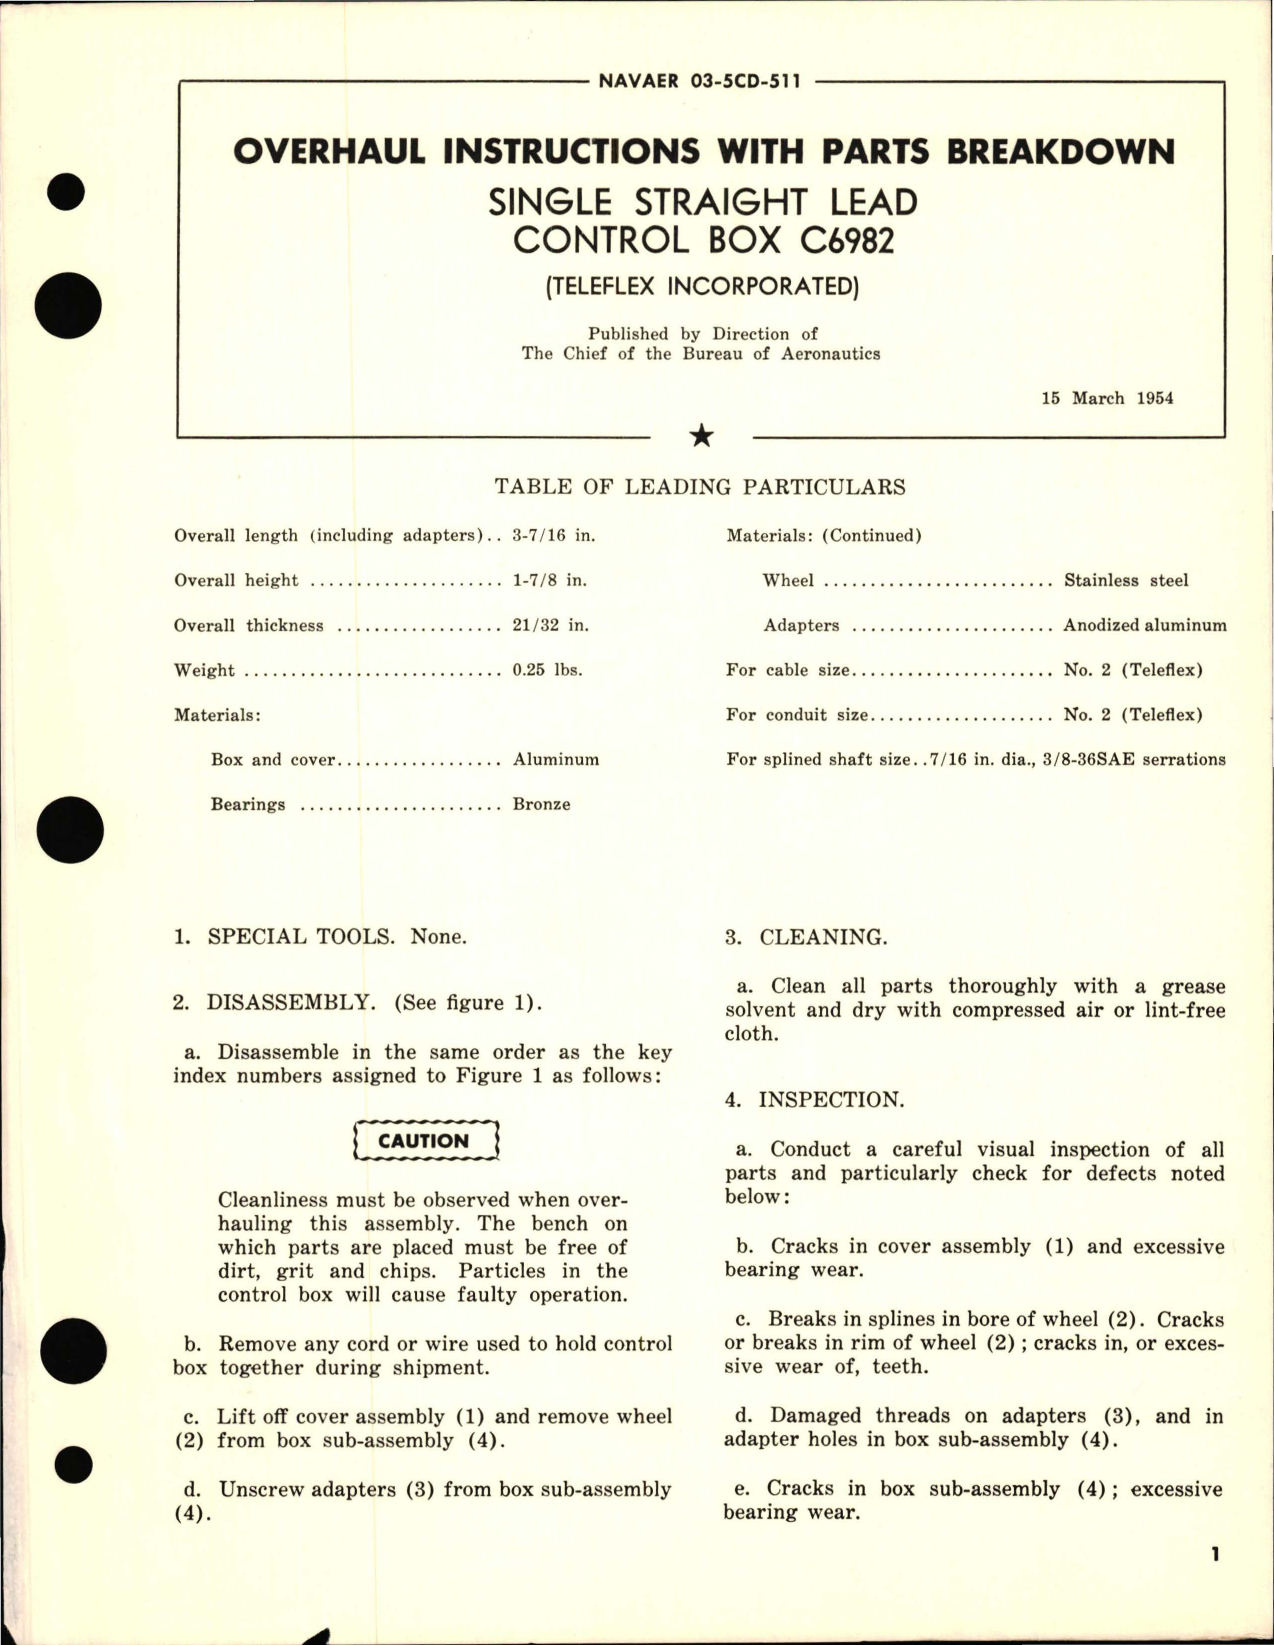 Sample page 1 from AirCorps Library document: Overhaul Instructions with Parts Breakdown for Single Straight Lead Control Box C6982